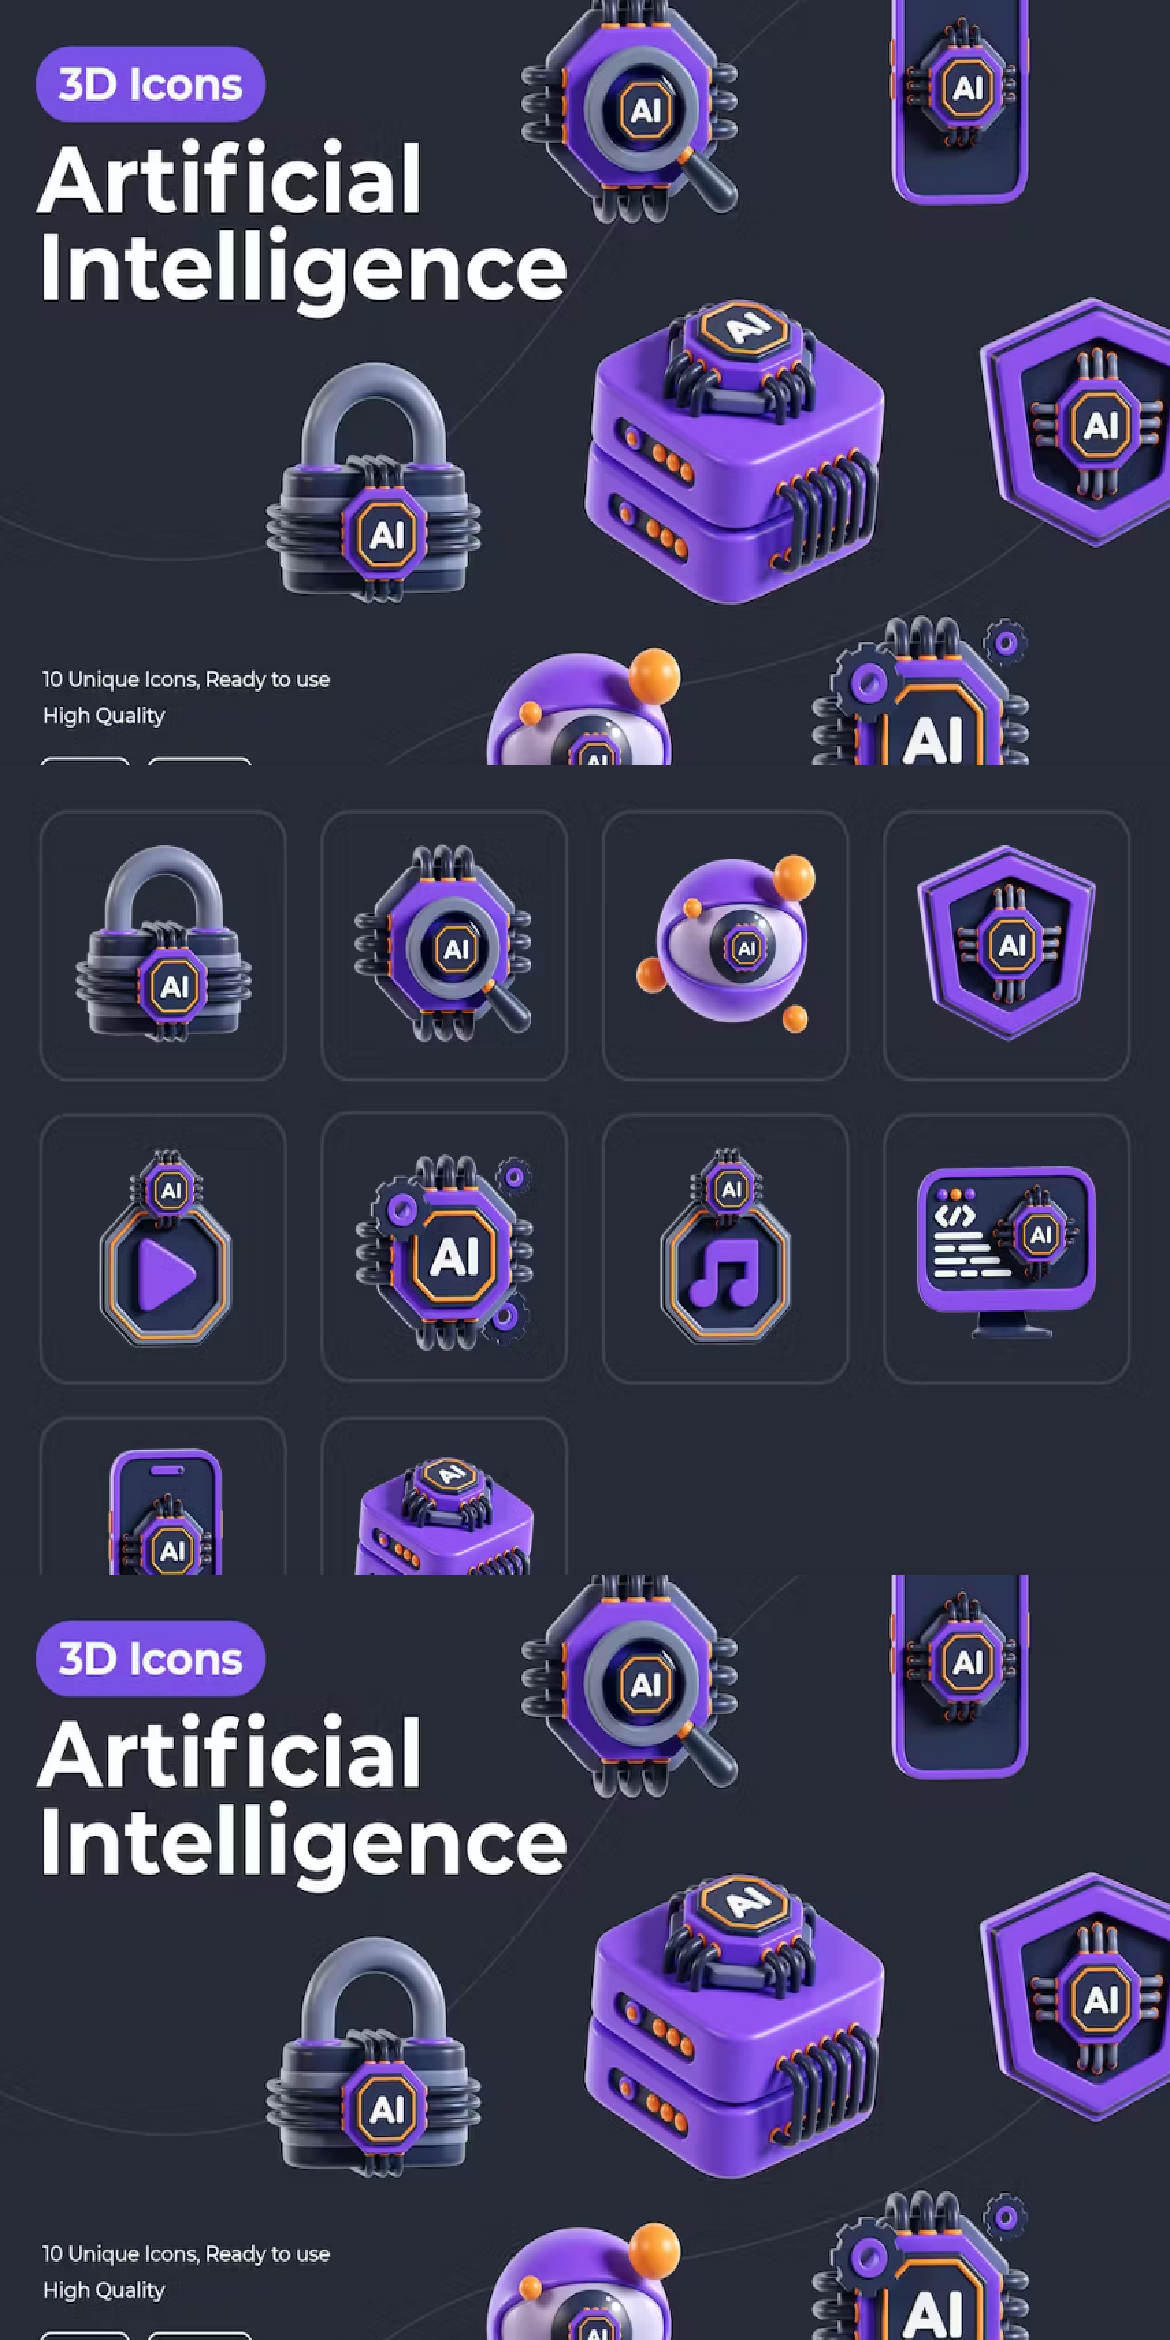 3D 3d icon Icon icons science intelligence Technology Data artificial machine